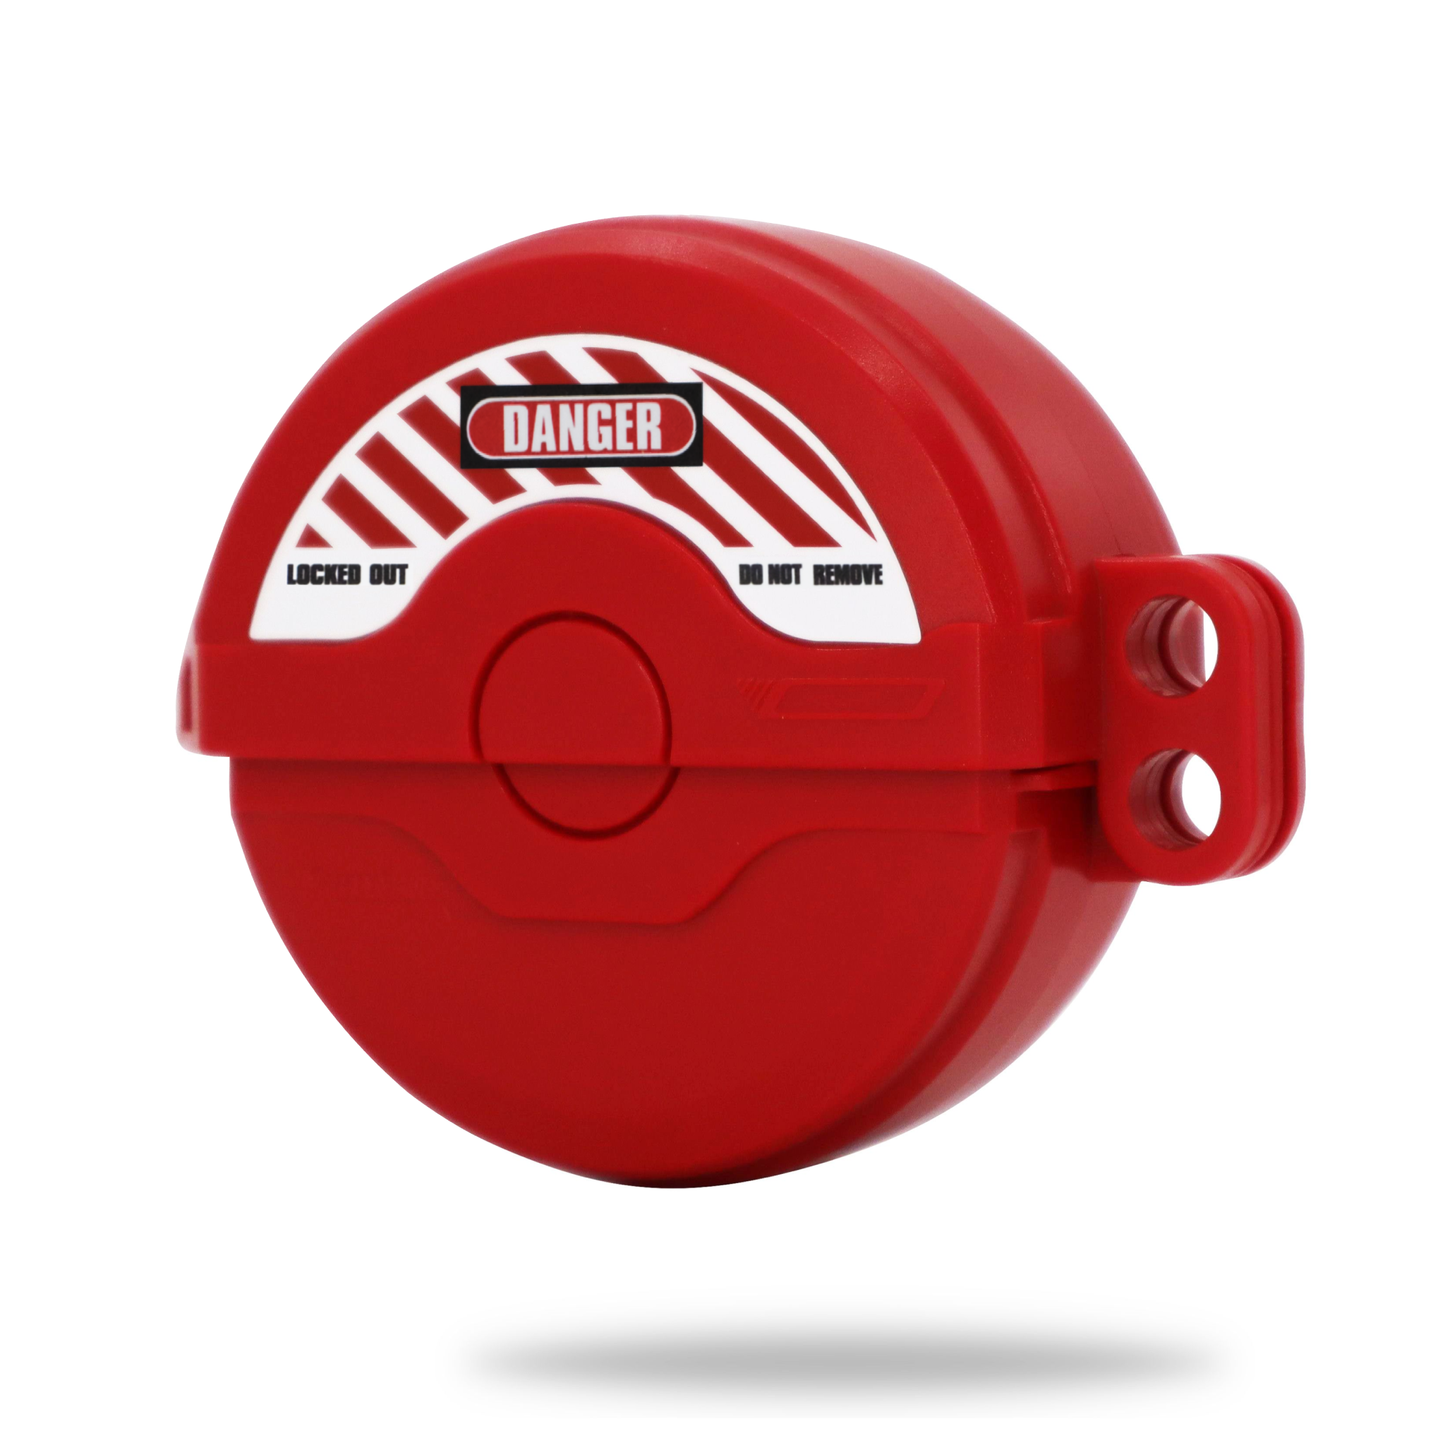 eye-level view of a red gate valve lockout